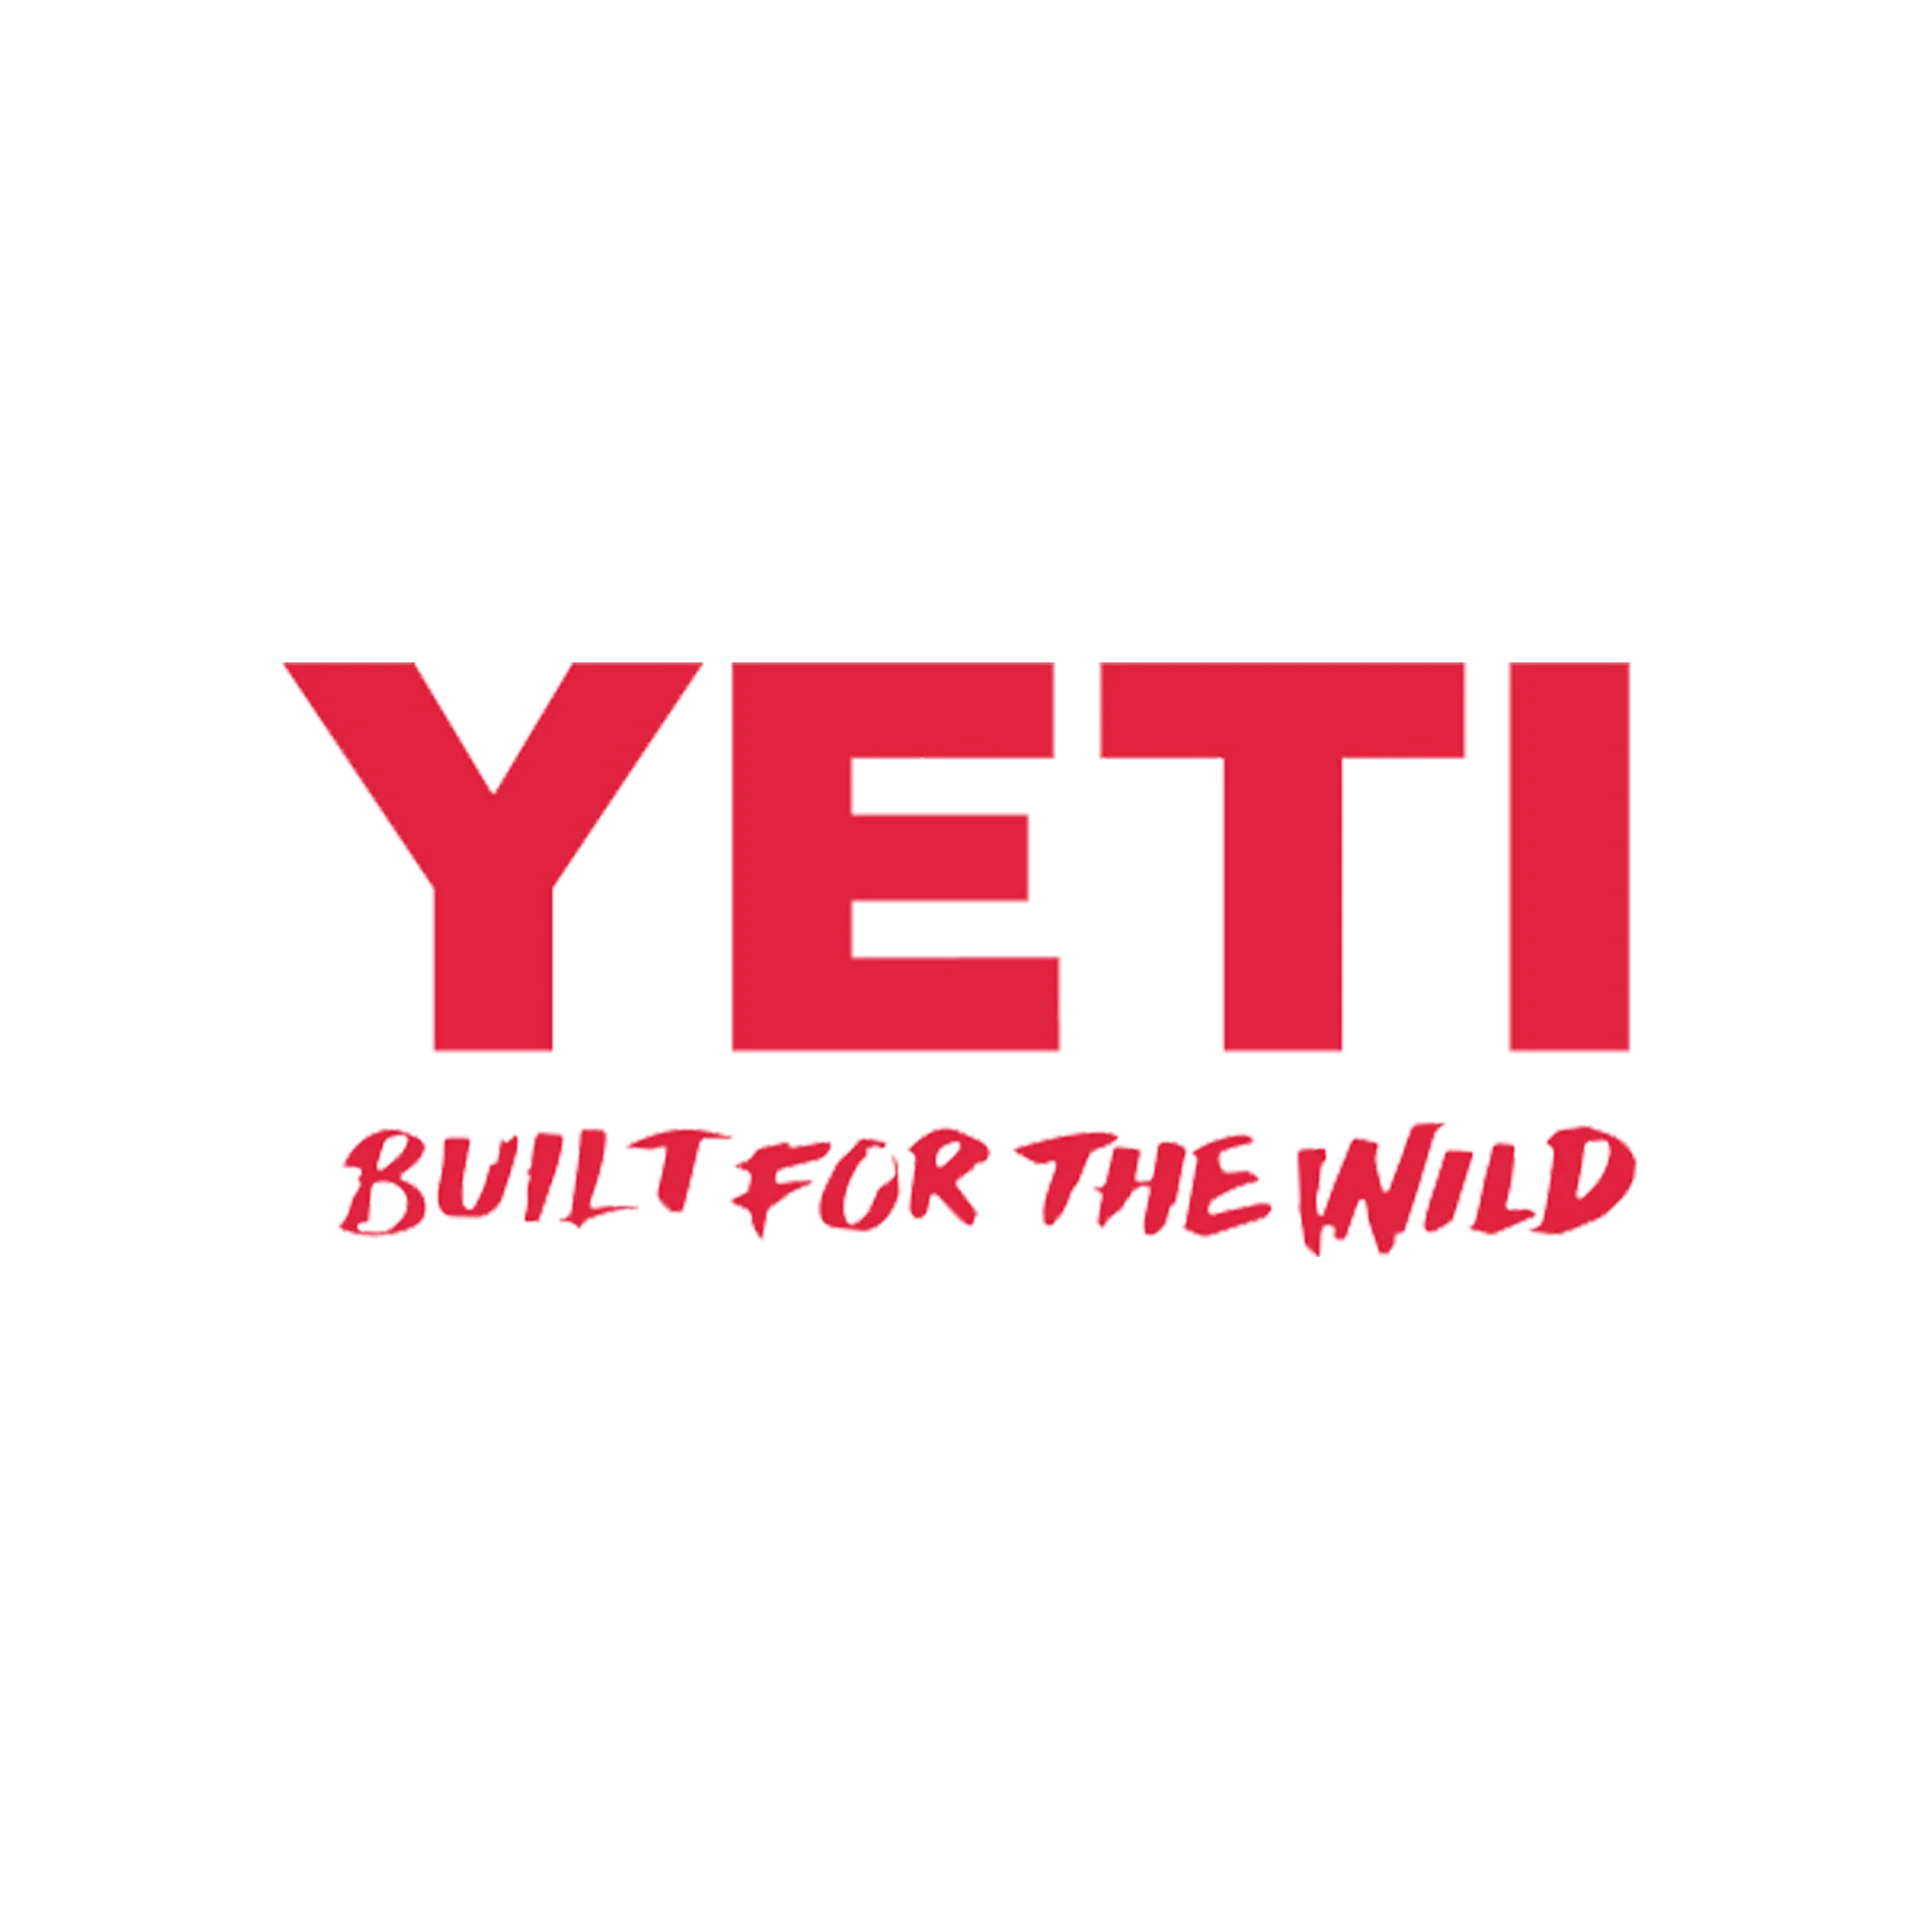 Built For The Wild Decal Red